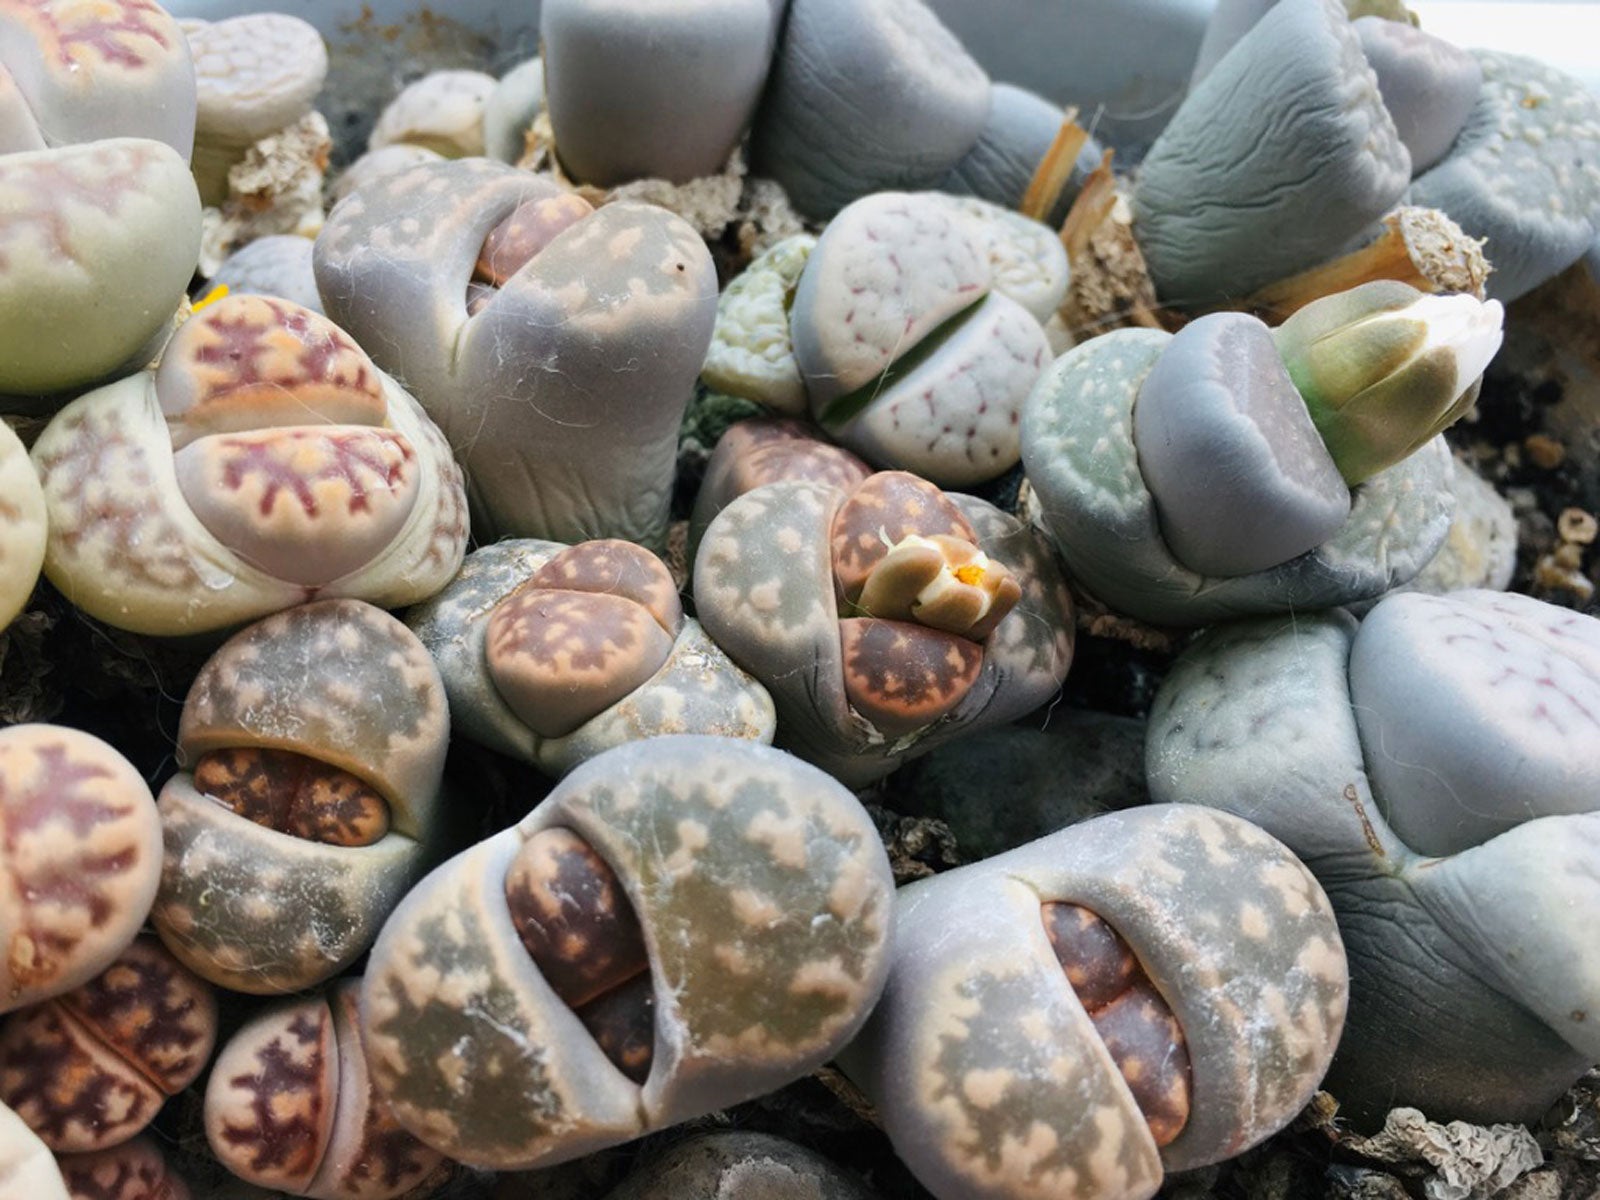 Lithops Care - Tips For Growing Living Stones